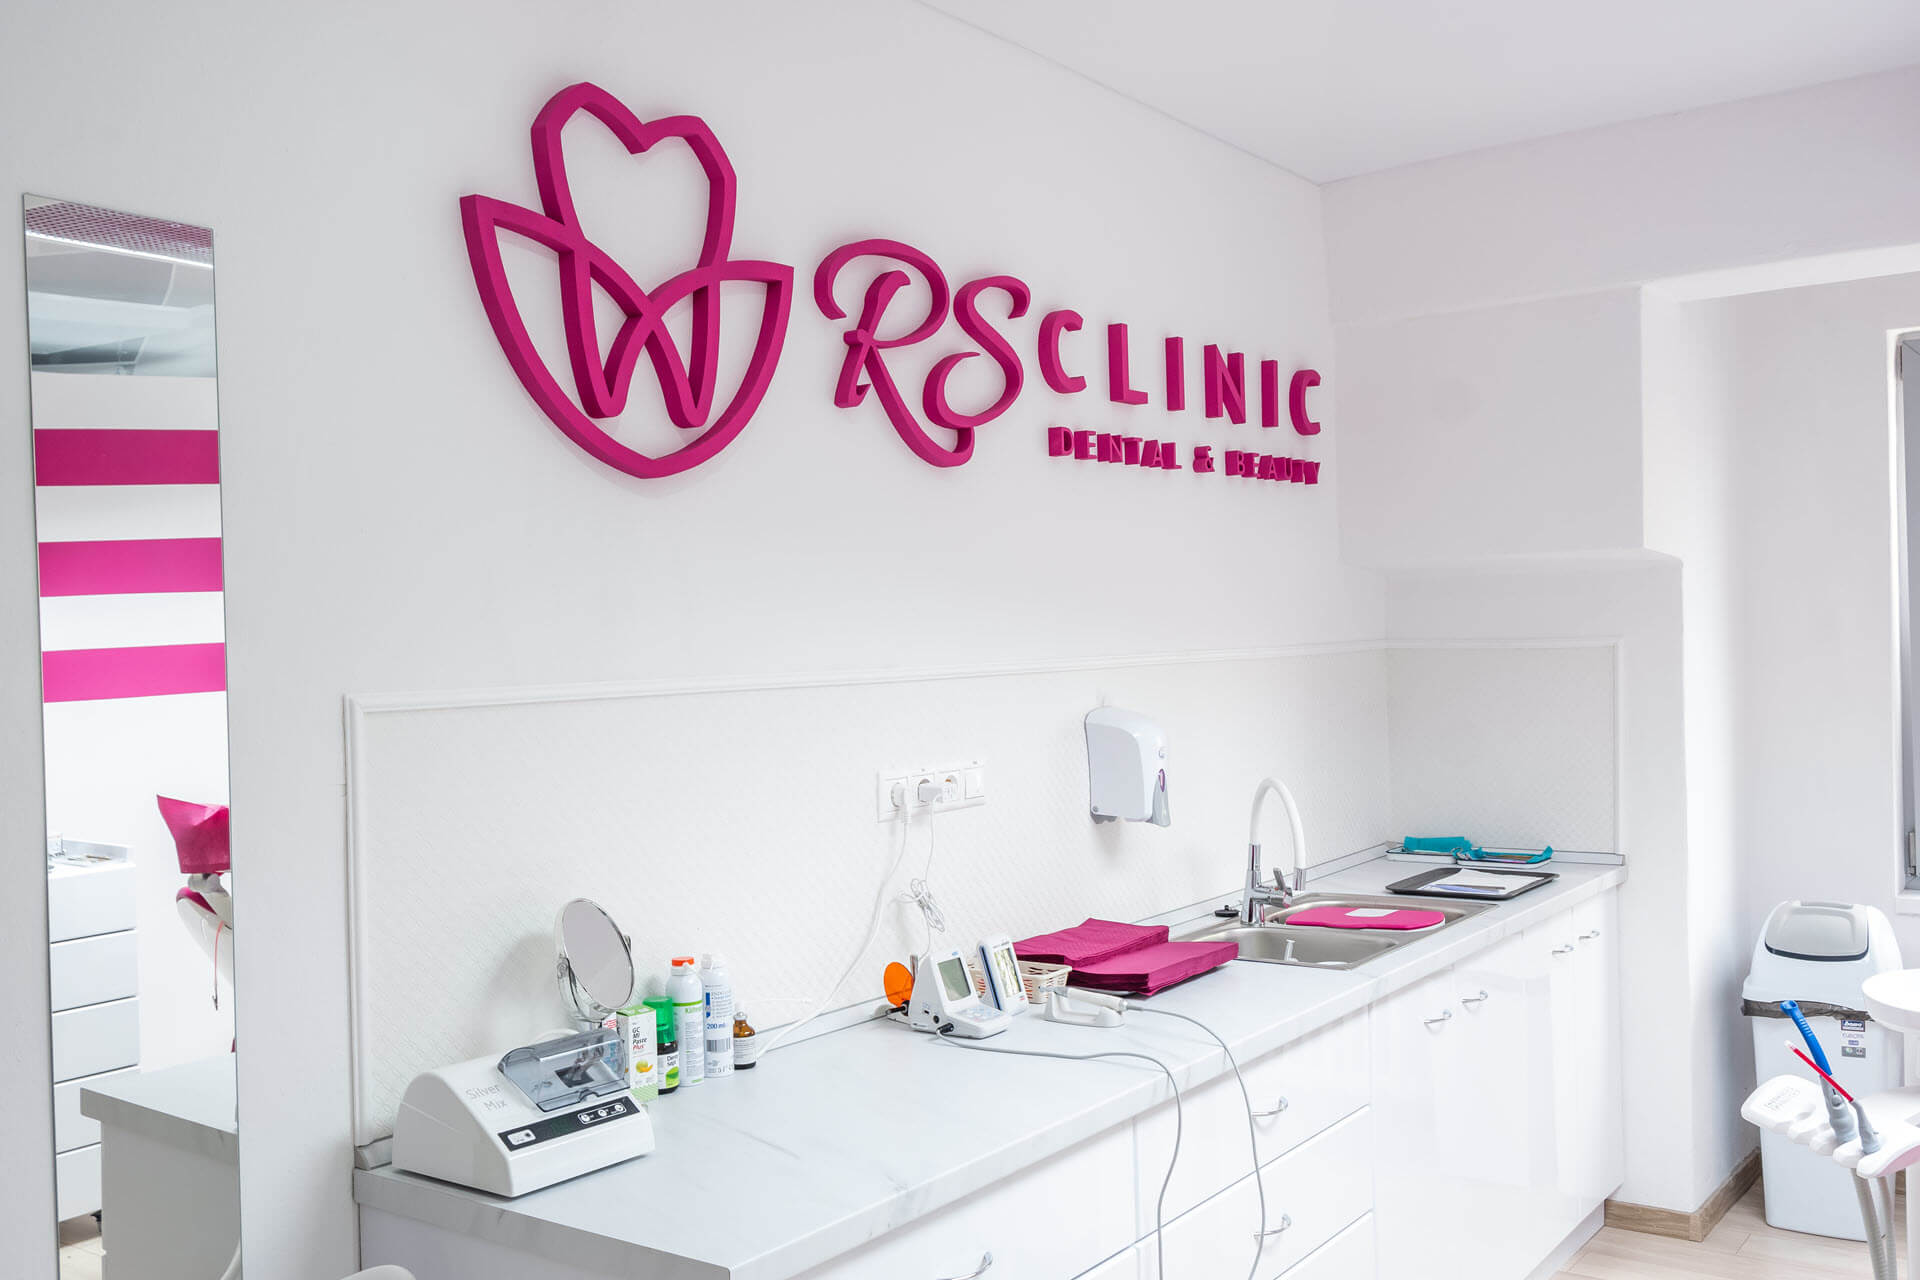 RS Clinic